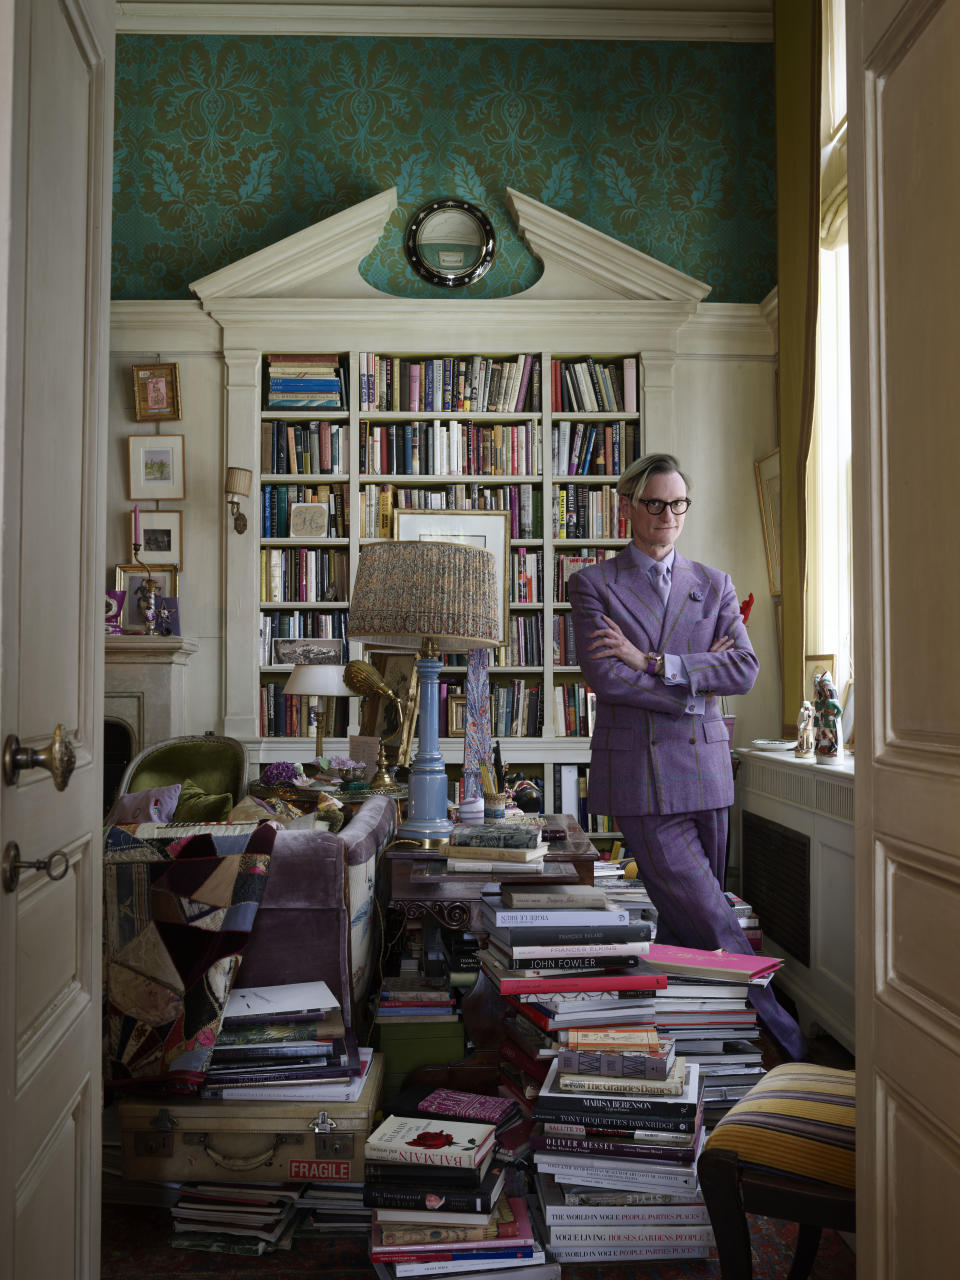 Hamish Bowles photographed by Simon Upton.